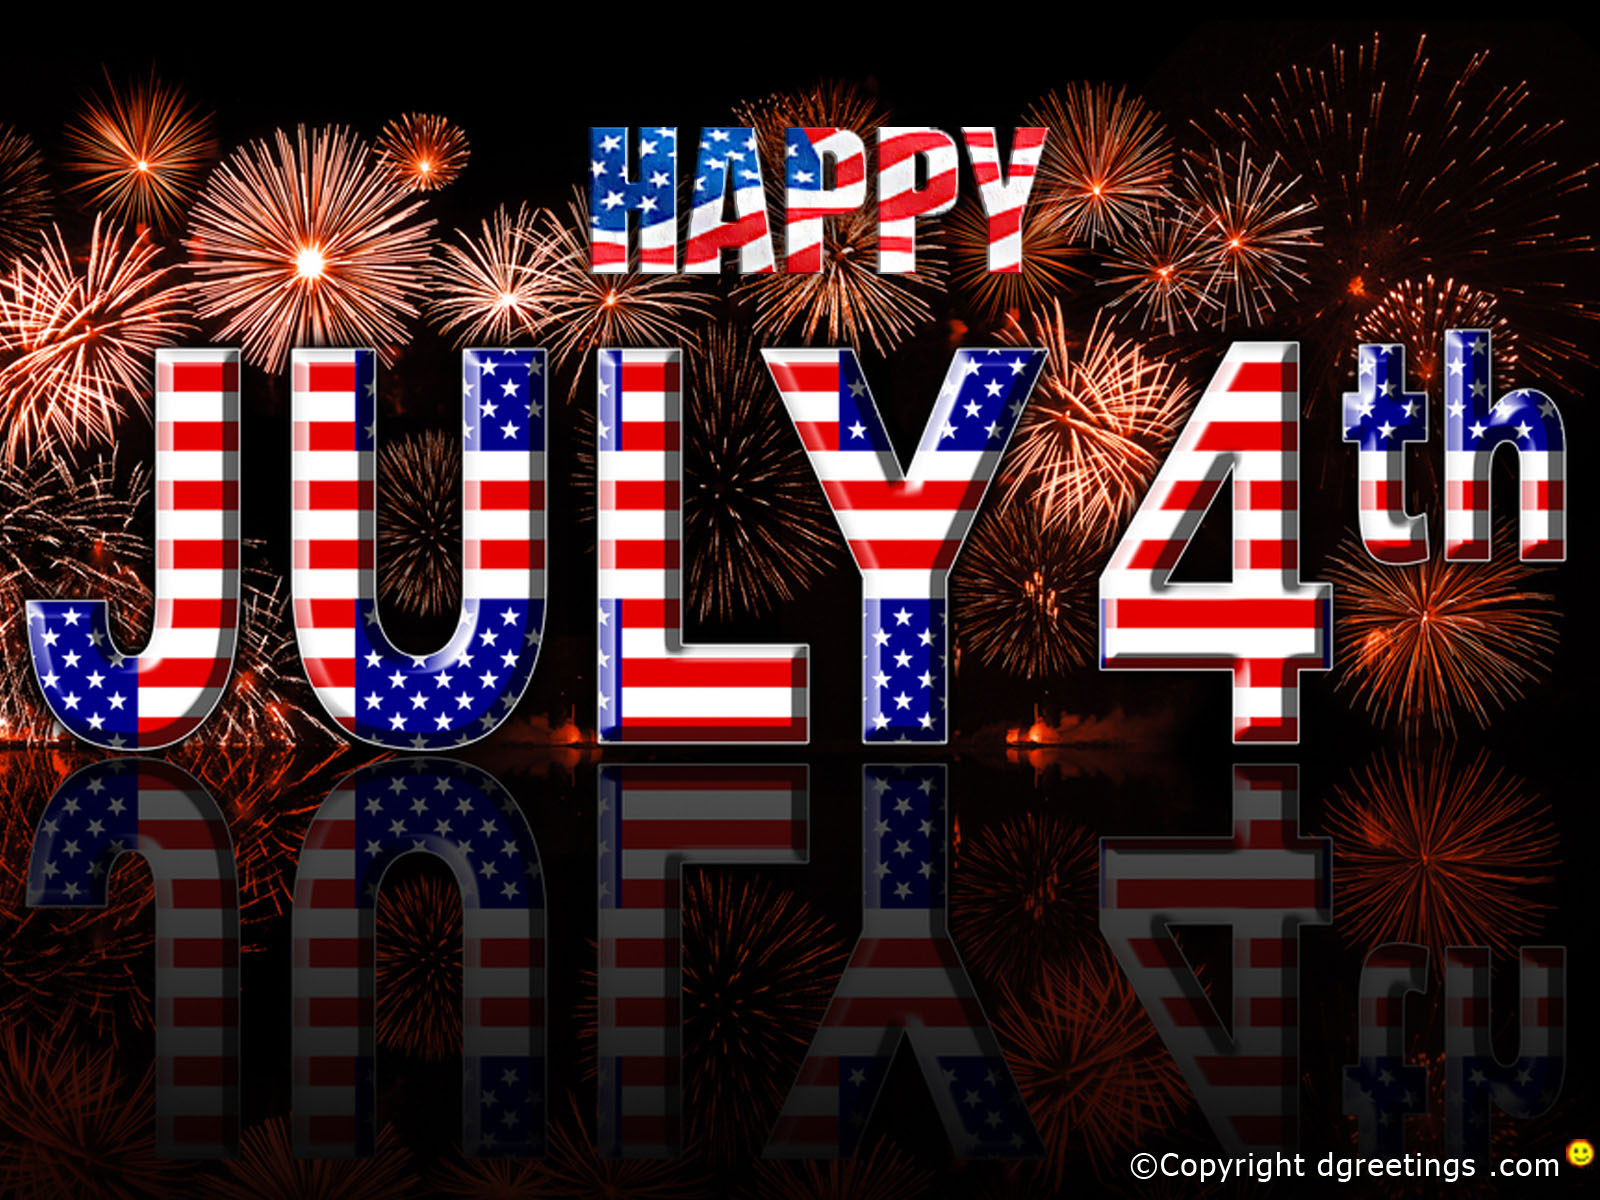 �� Download July Fourth Wallpaper Usa Independence Day 4th by @katelynrussell  4th of July Free 